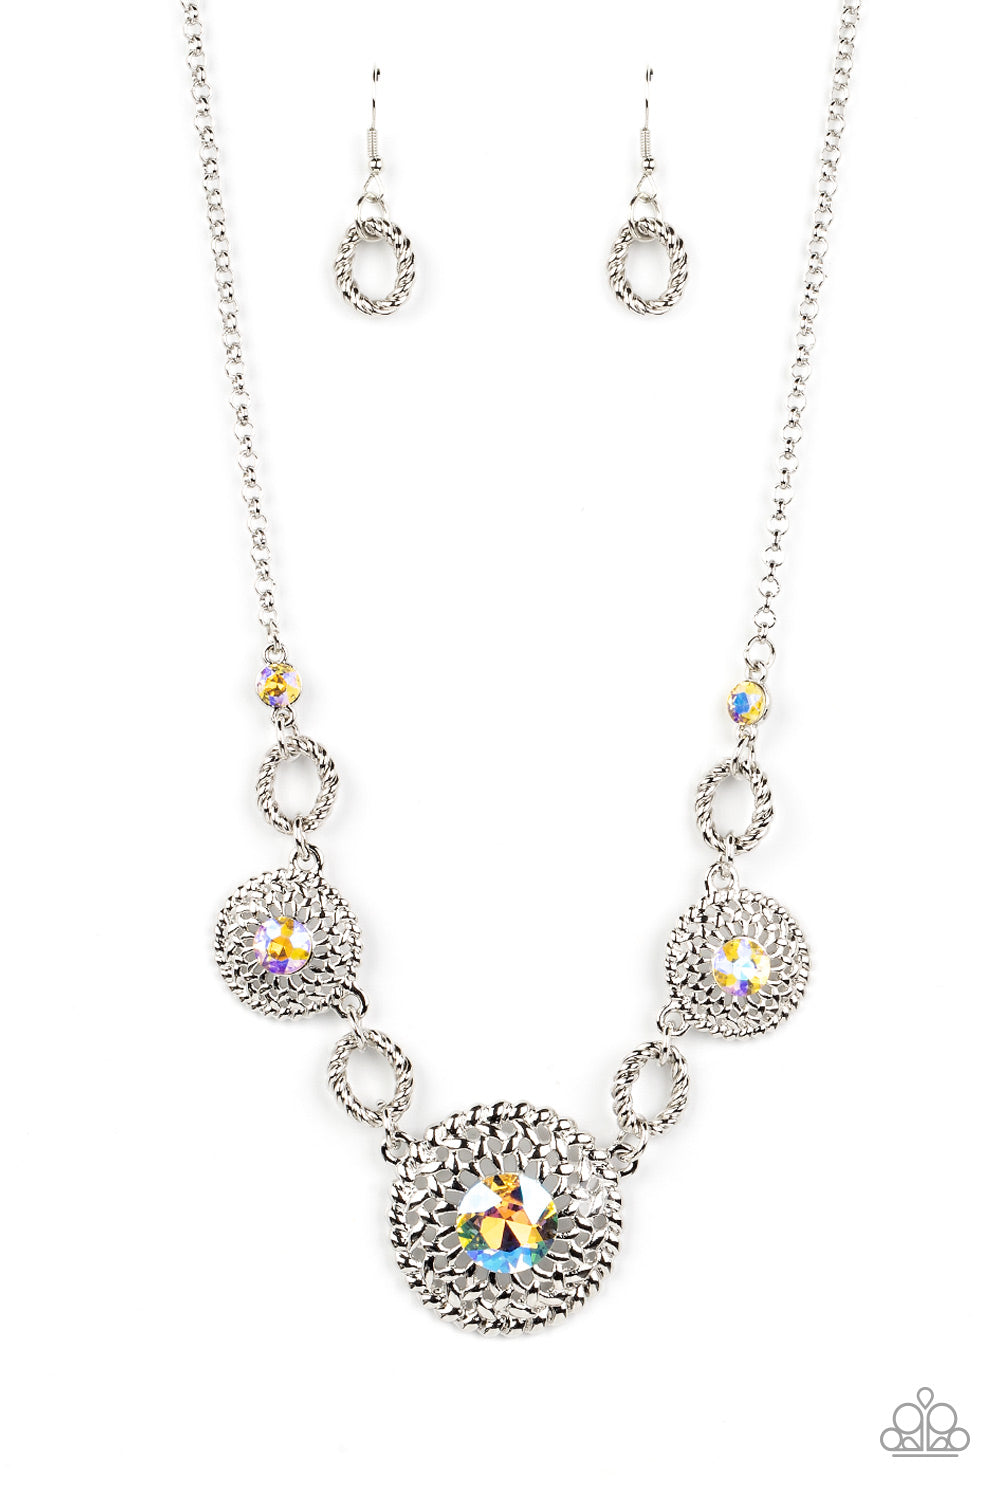 Cosmic Cosmos - Yellow Iridescent Rhinestones/Airy Silver Petal Paparazzi Necklace & matching earrings